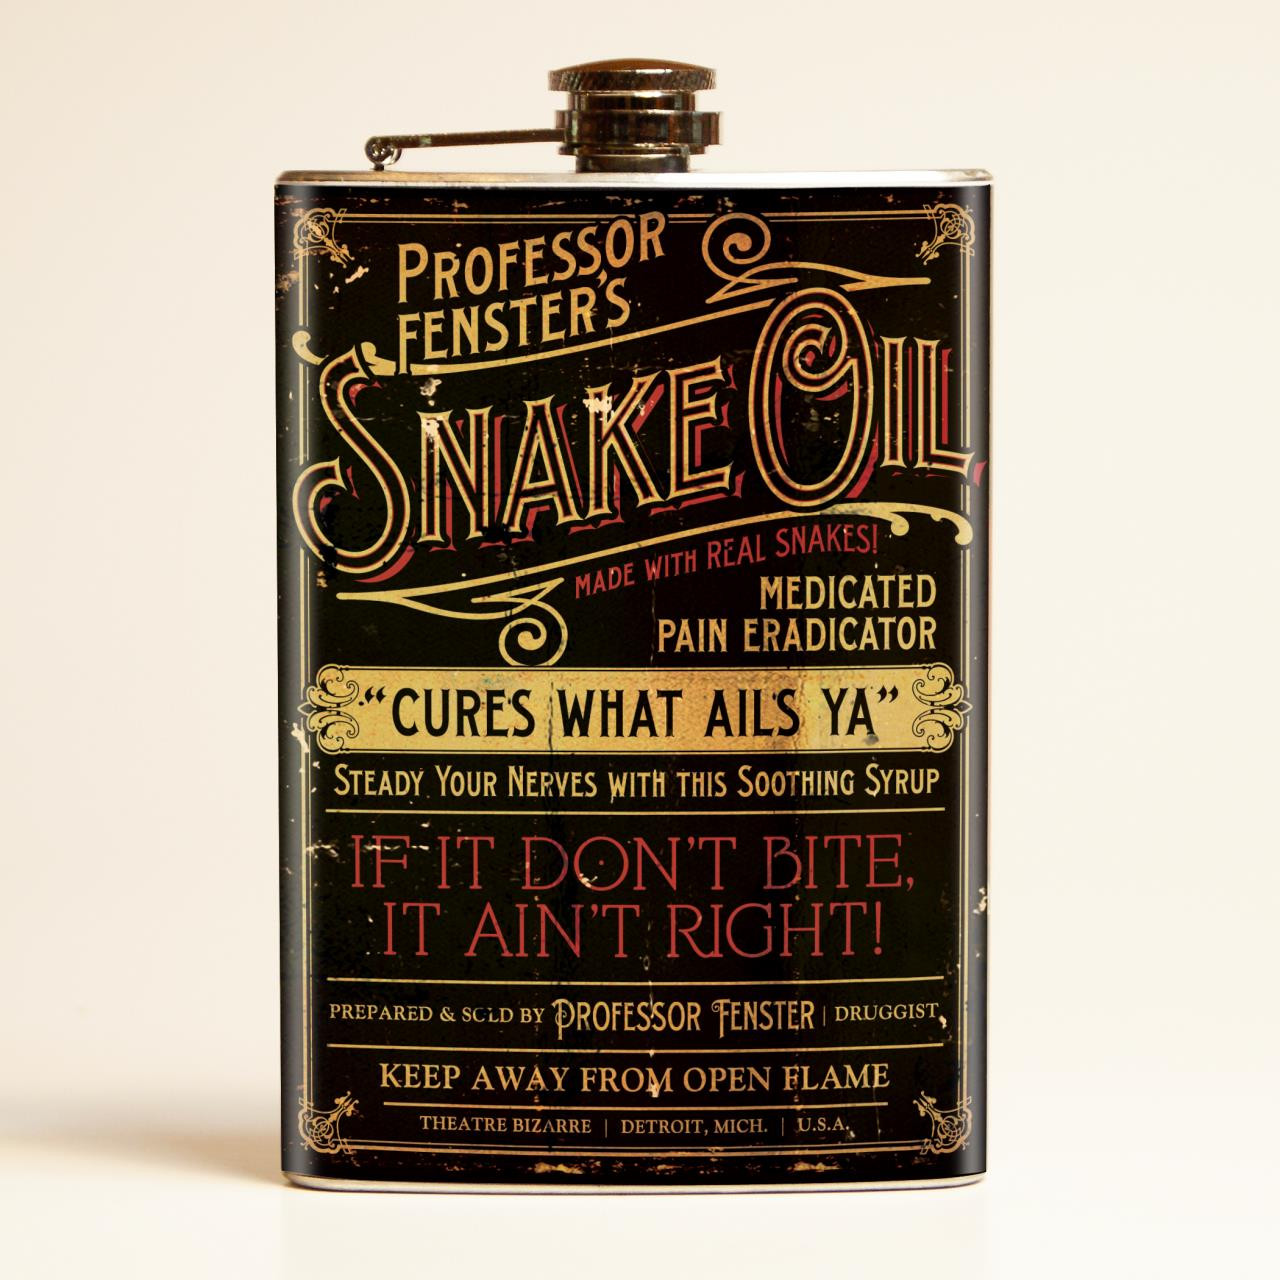 Theatre-Bizarre-Snake-Oil-Flask-OUT-OF-STOCK-FLWTBSO_image1__25696.1490638393.1280.1280.jpg?c=2